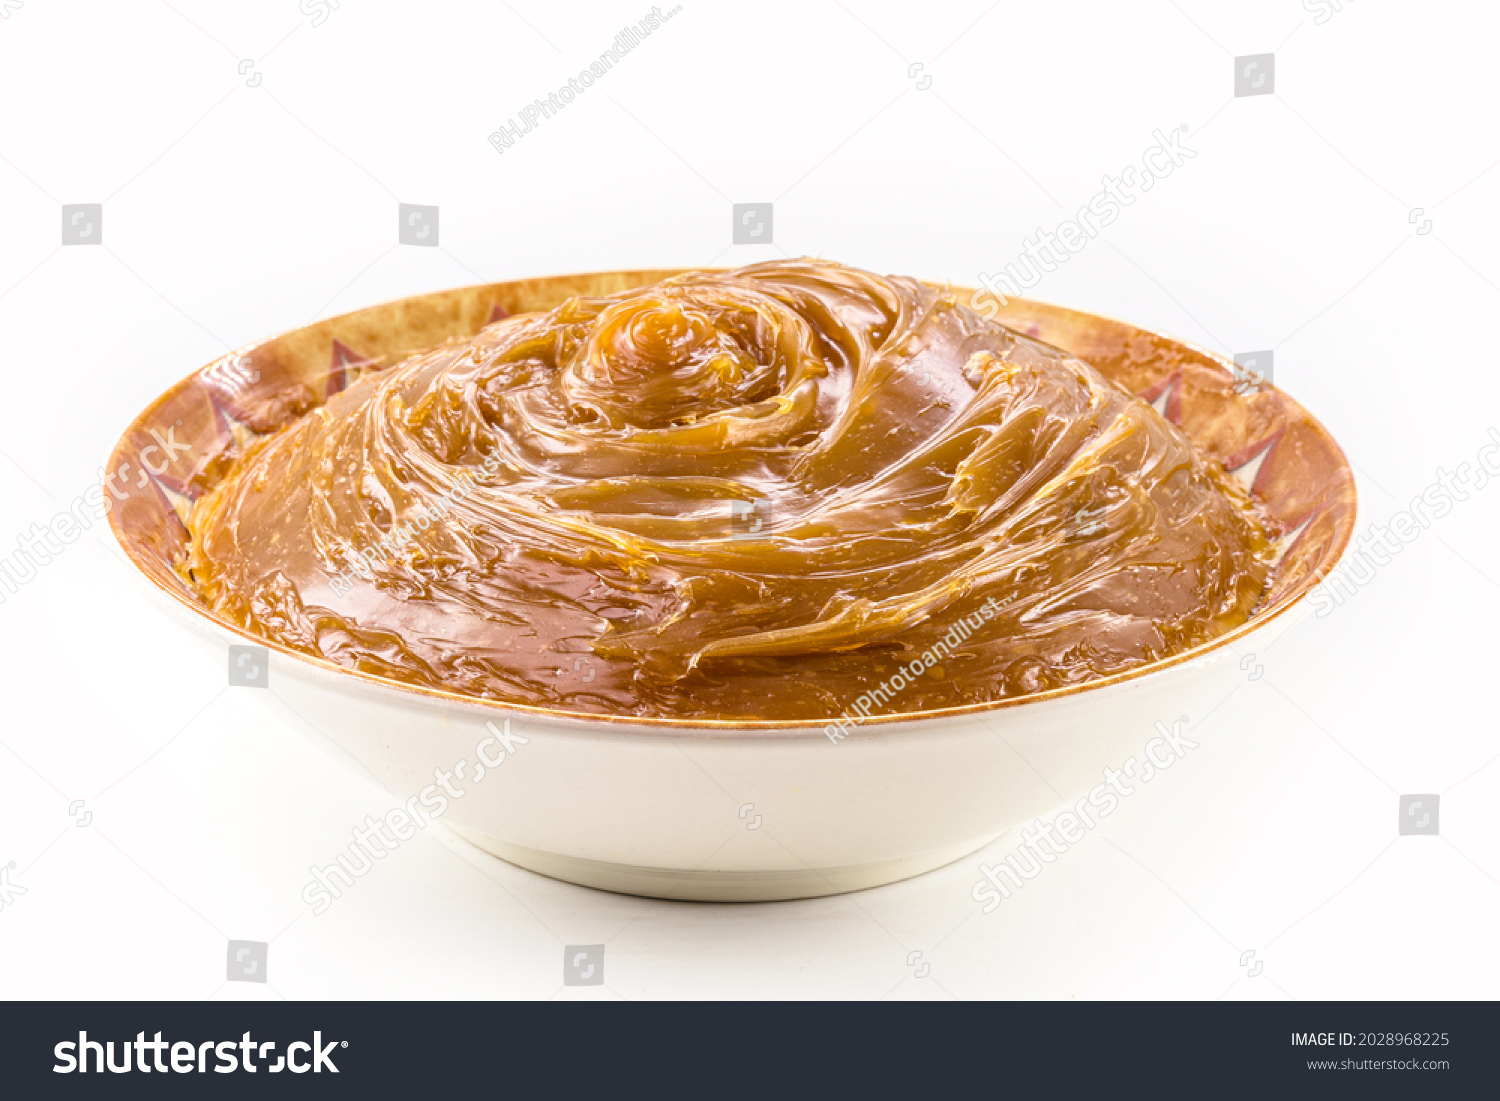 bowl with homemade dulce de leche, condensed cream or doughy caramel, isolated white background. #2028968225